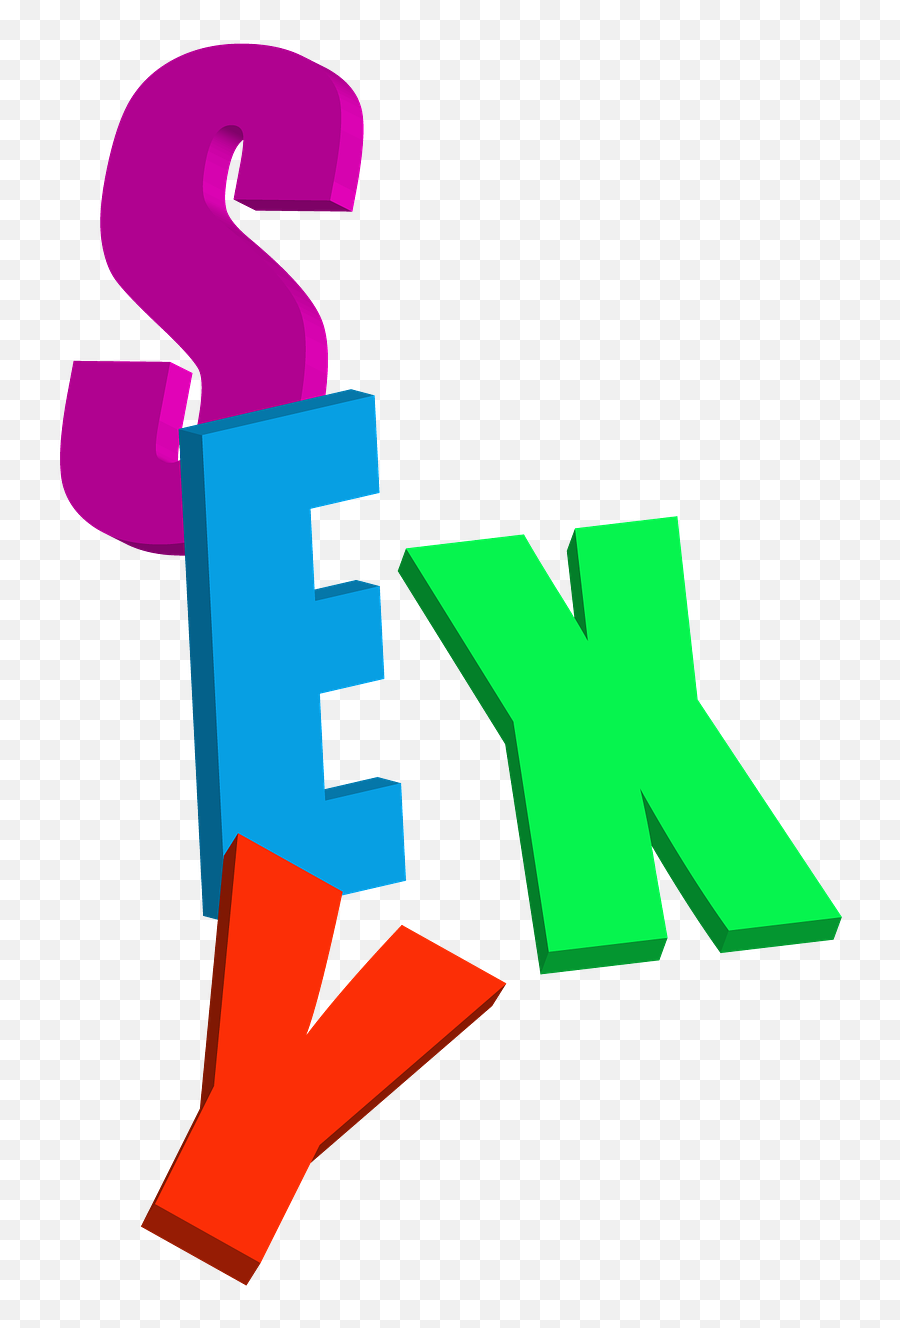 Letters Sexy Text - Free Image On Pixabay Emoji,^^ Text Emoticon